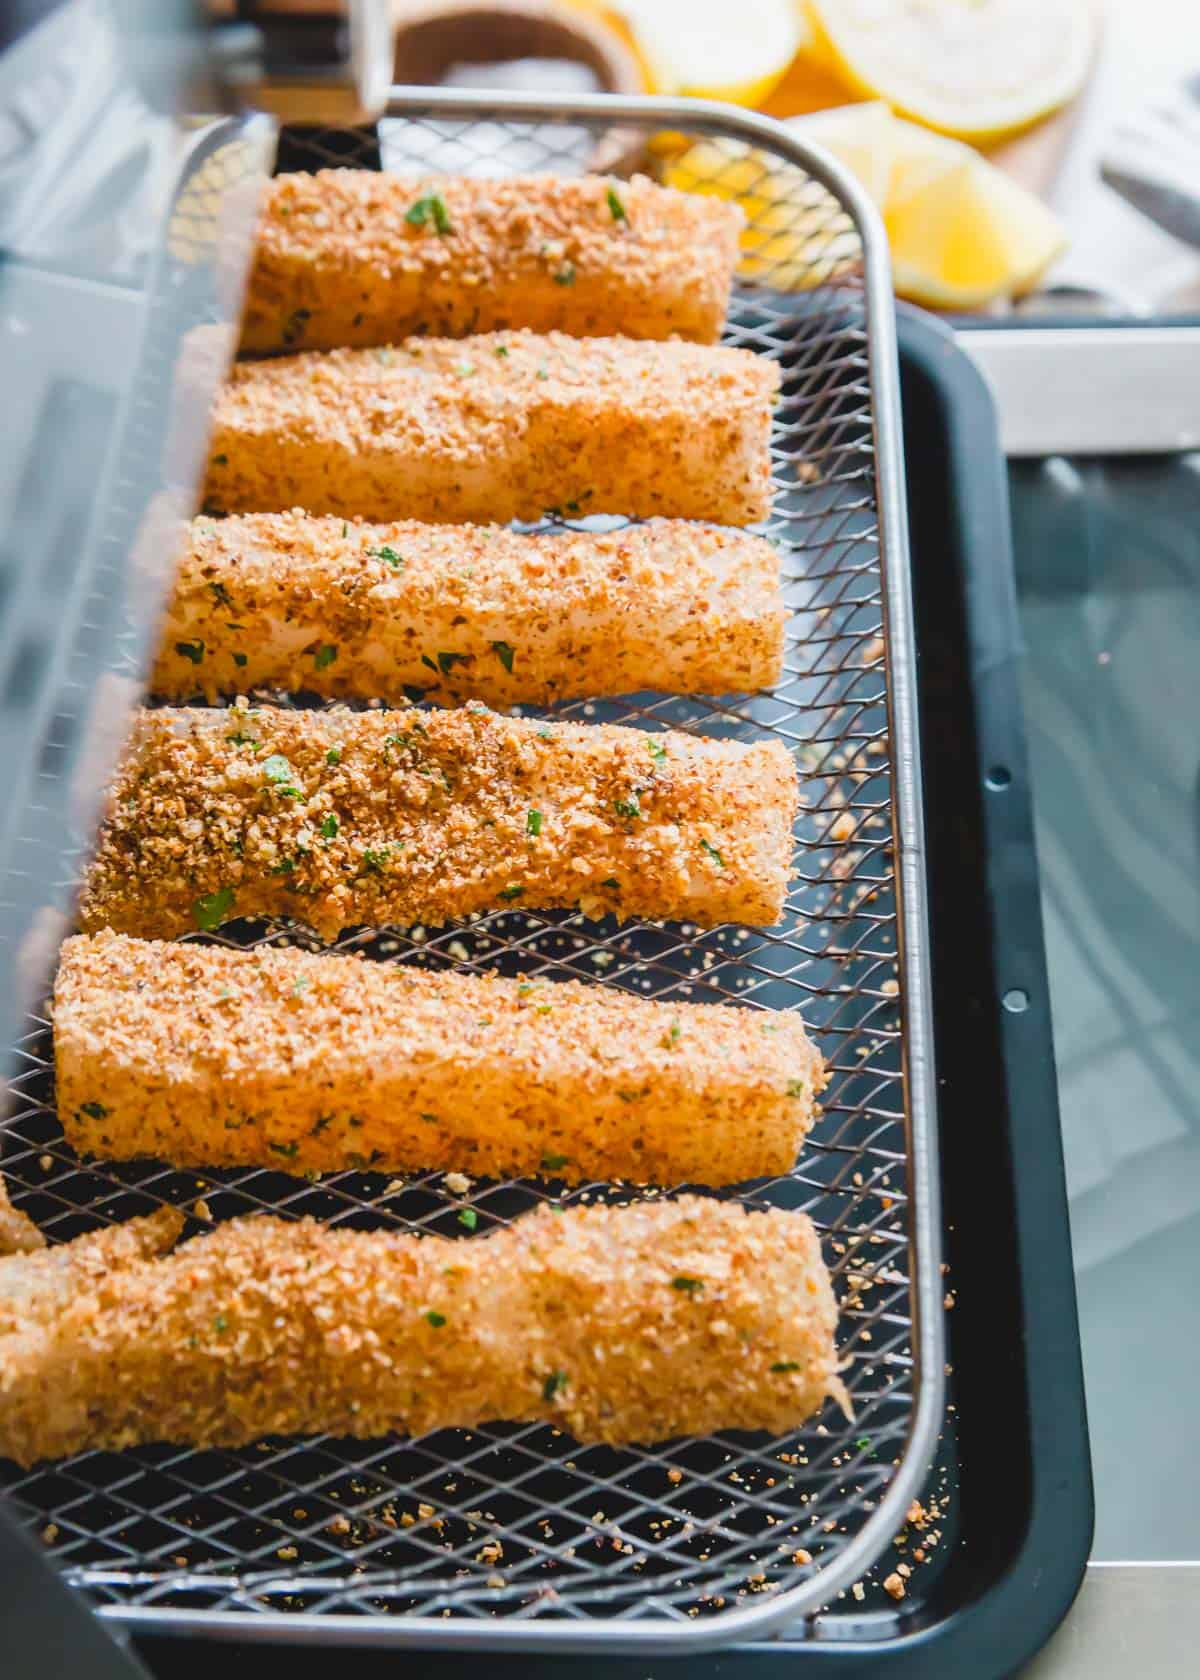 Breadcrumb coated cod is placed on the tray or basket of an air fryer to cook until crispy.